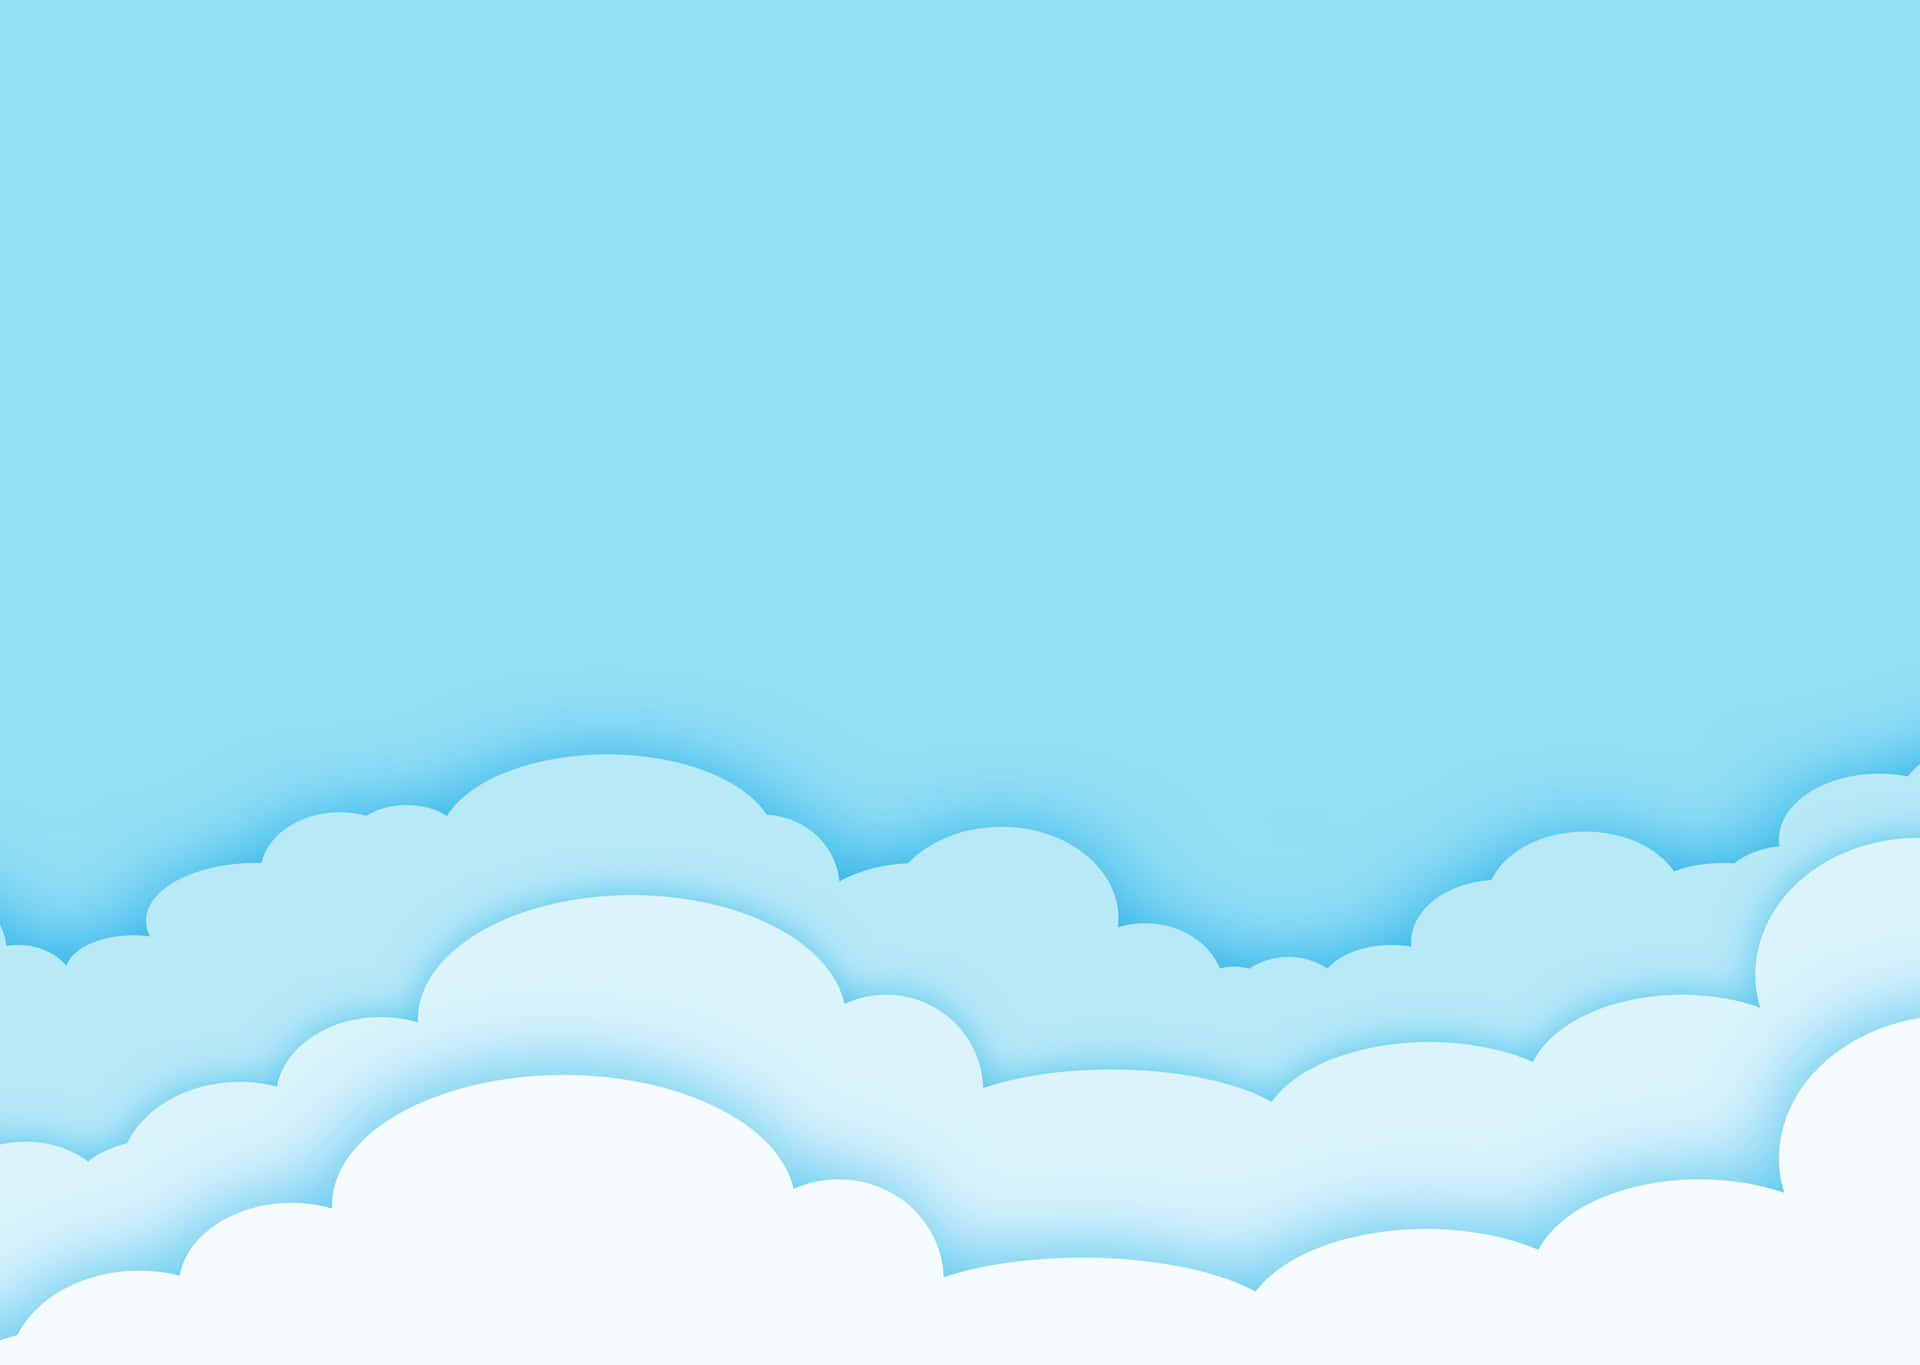 Clouds Background In Cartoon Style